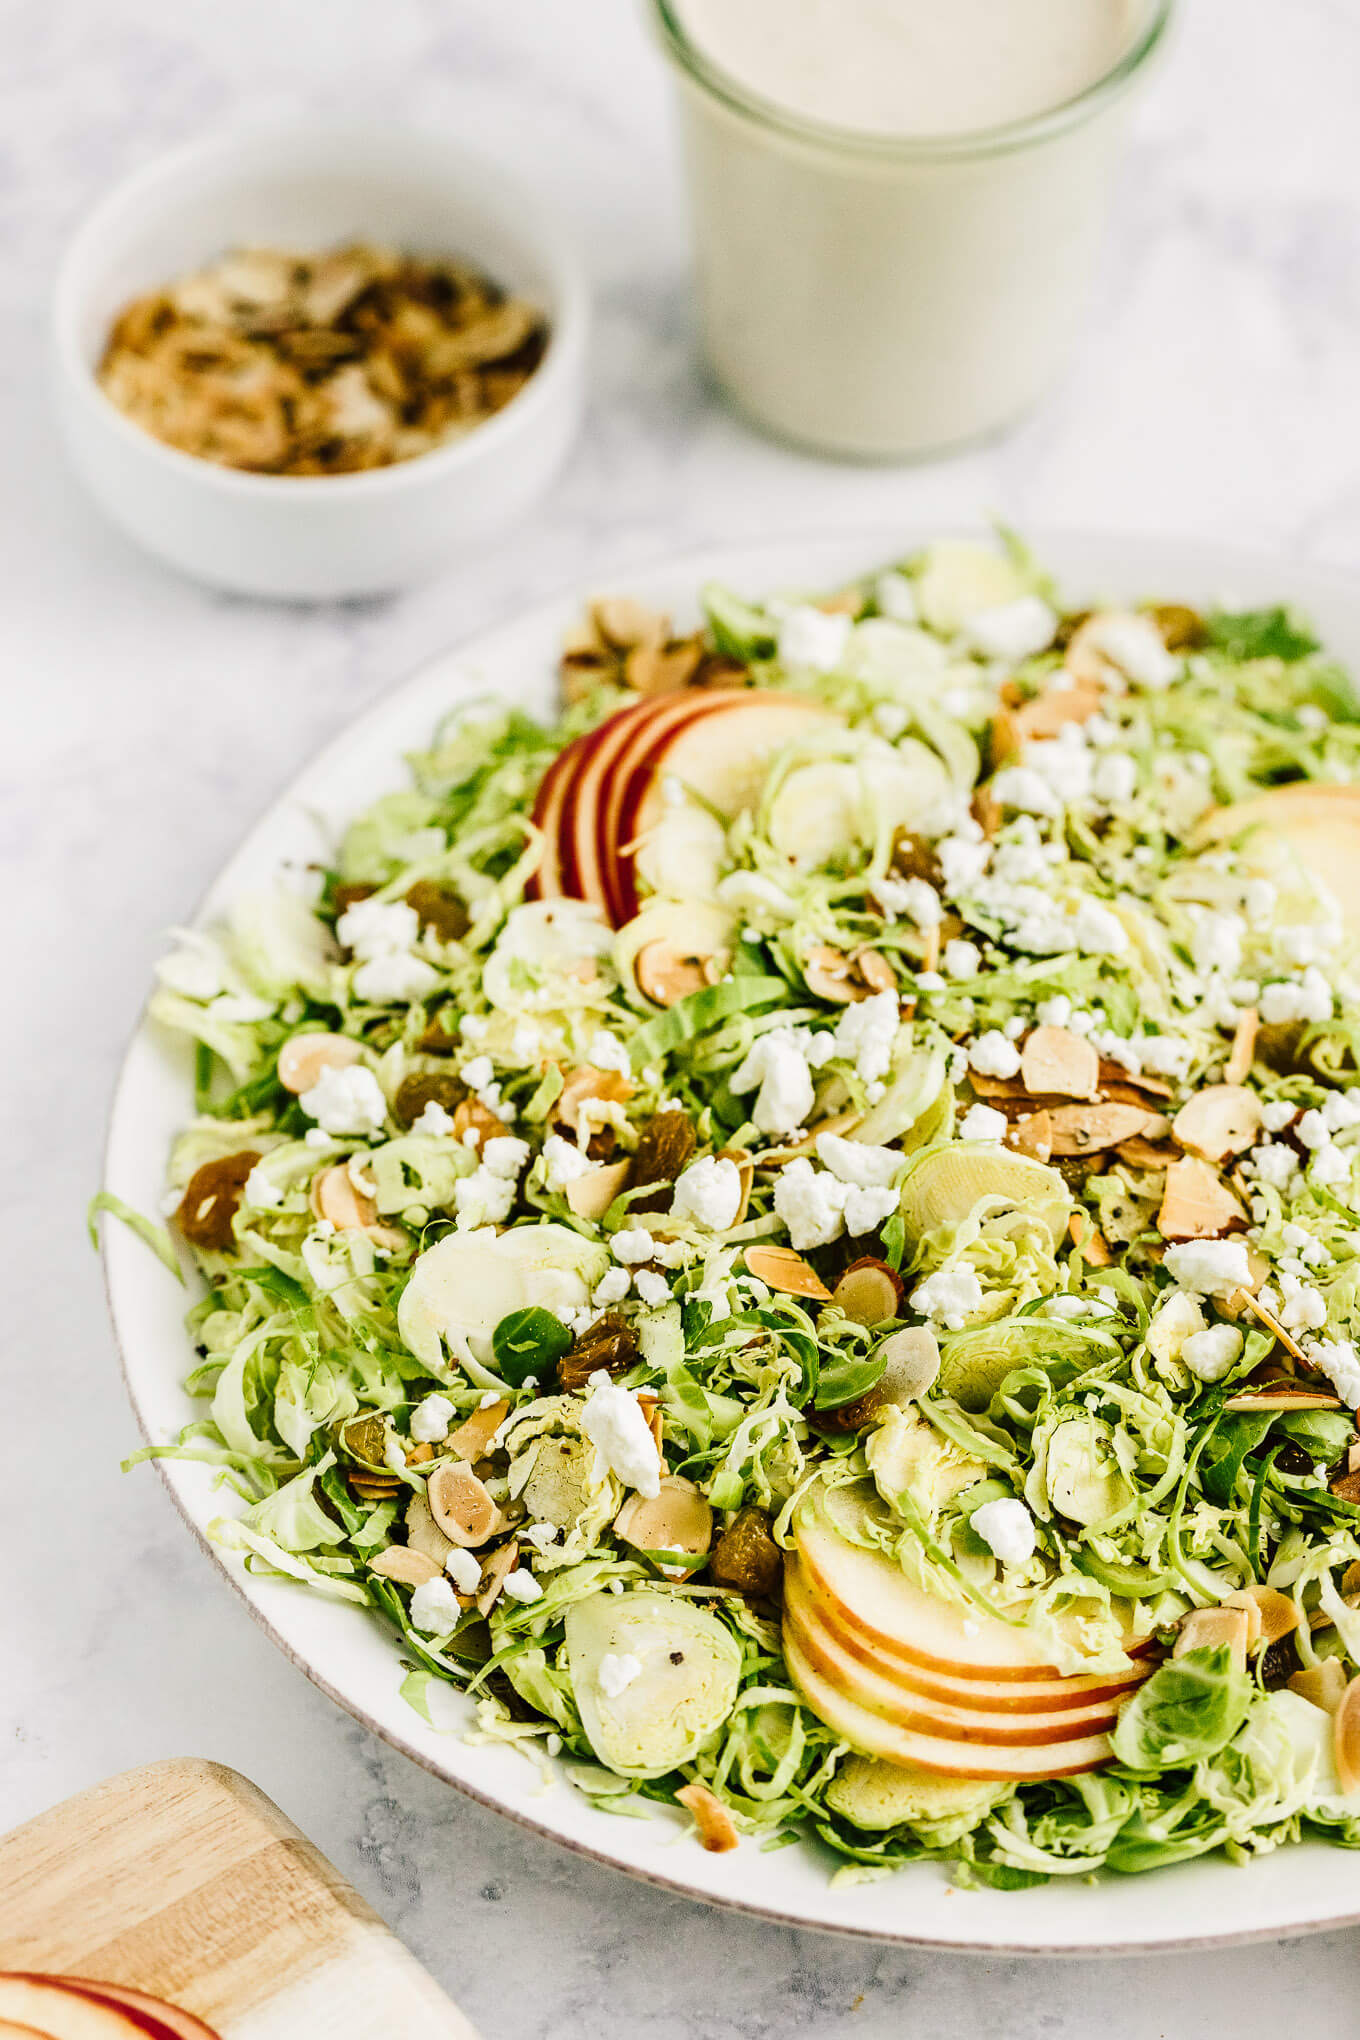 Shaved Brussels sprout and apples salad with golden raisins and goat cheese